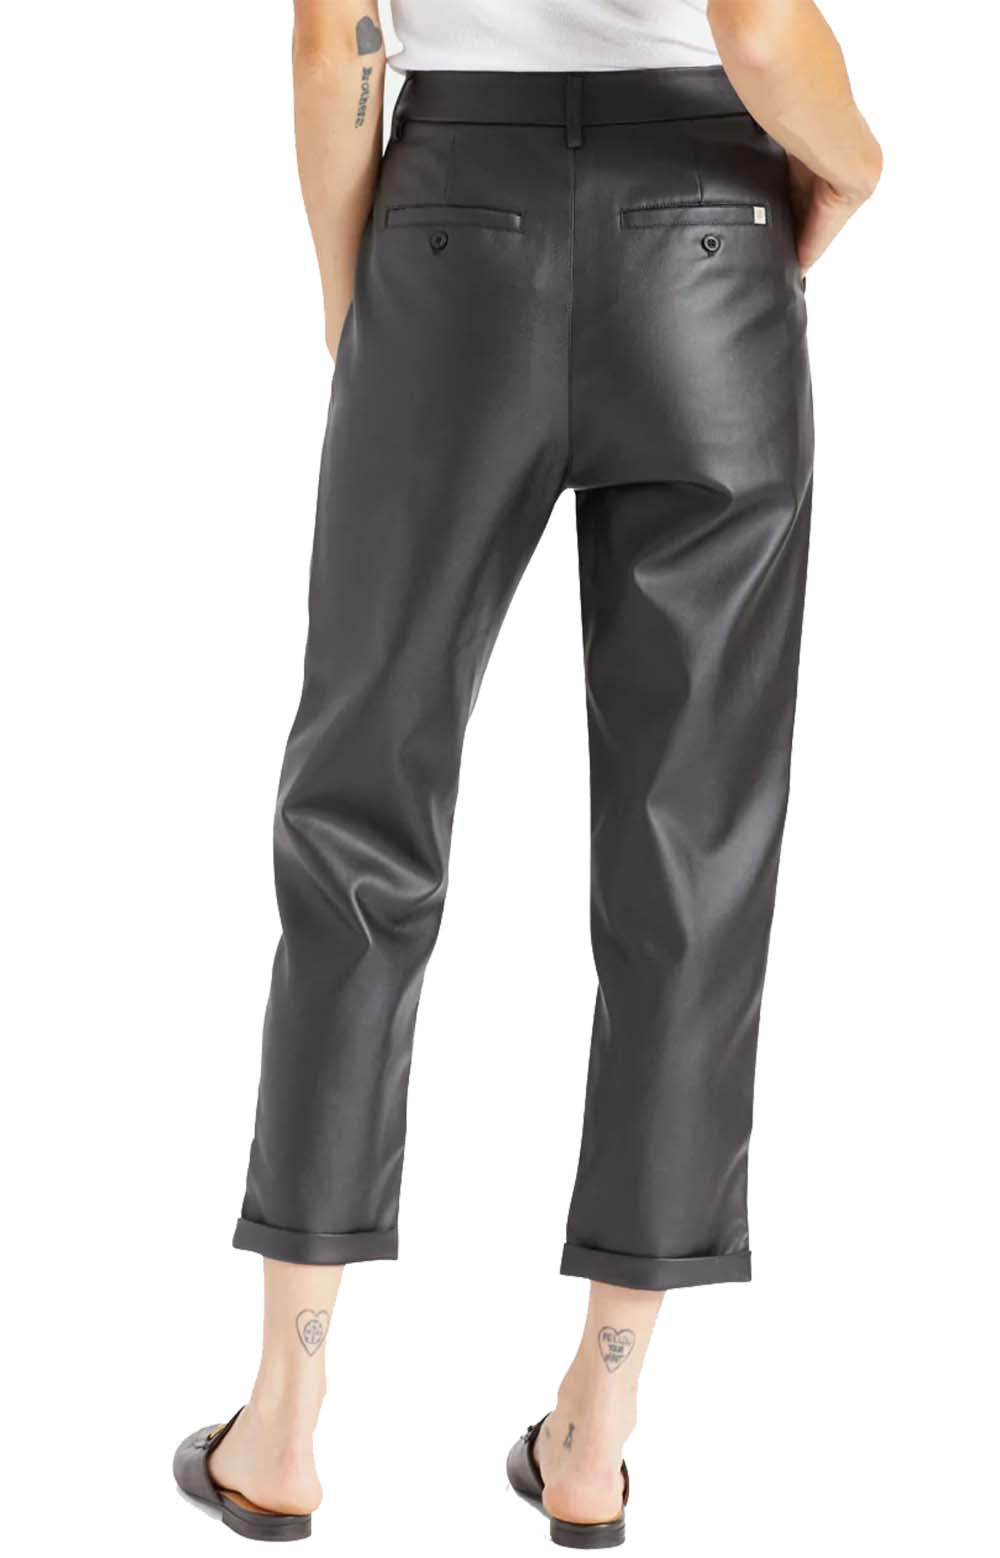 Aberdeen Leather Trouser Pant - Black